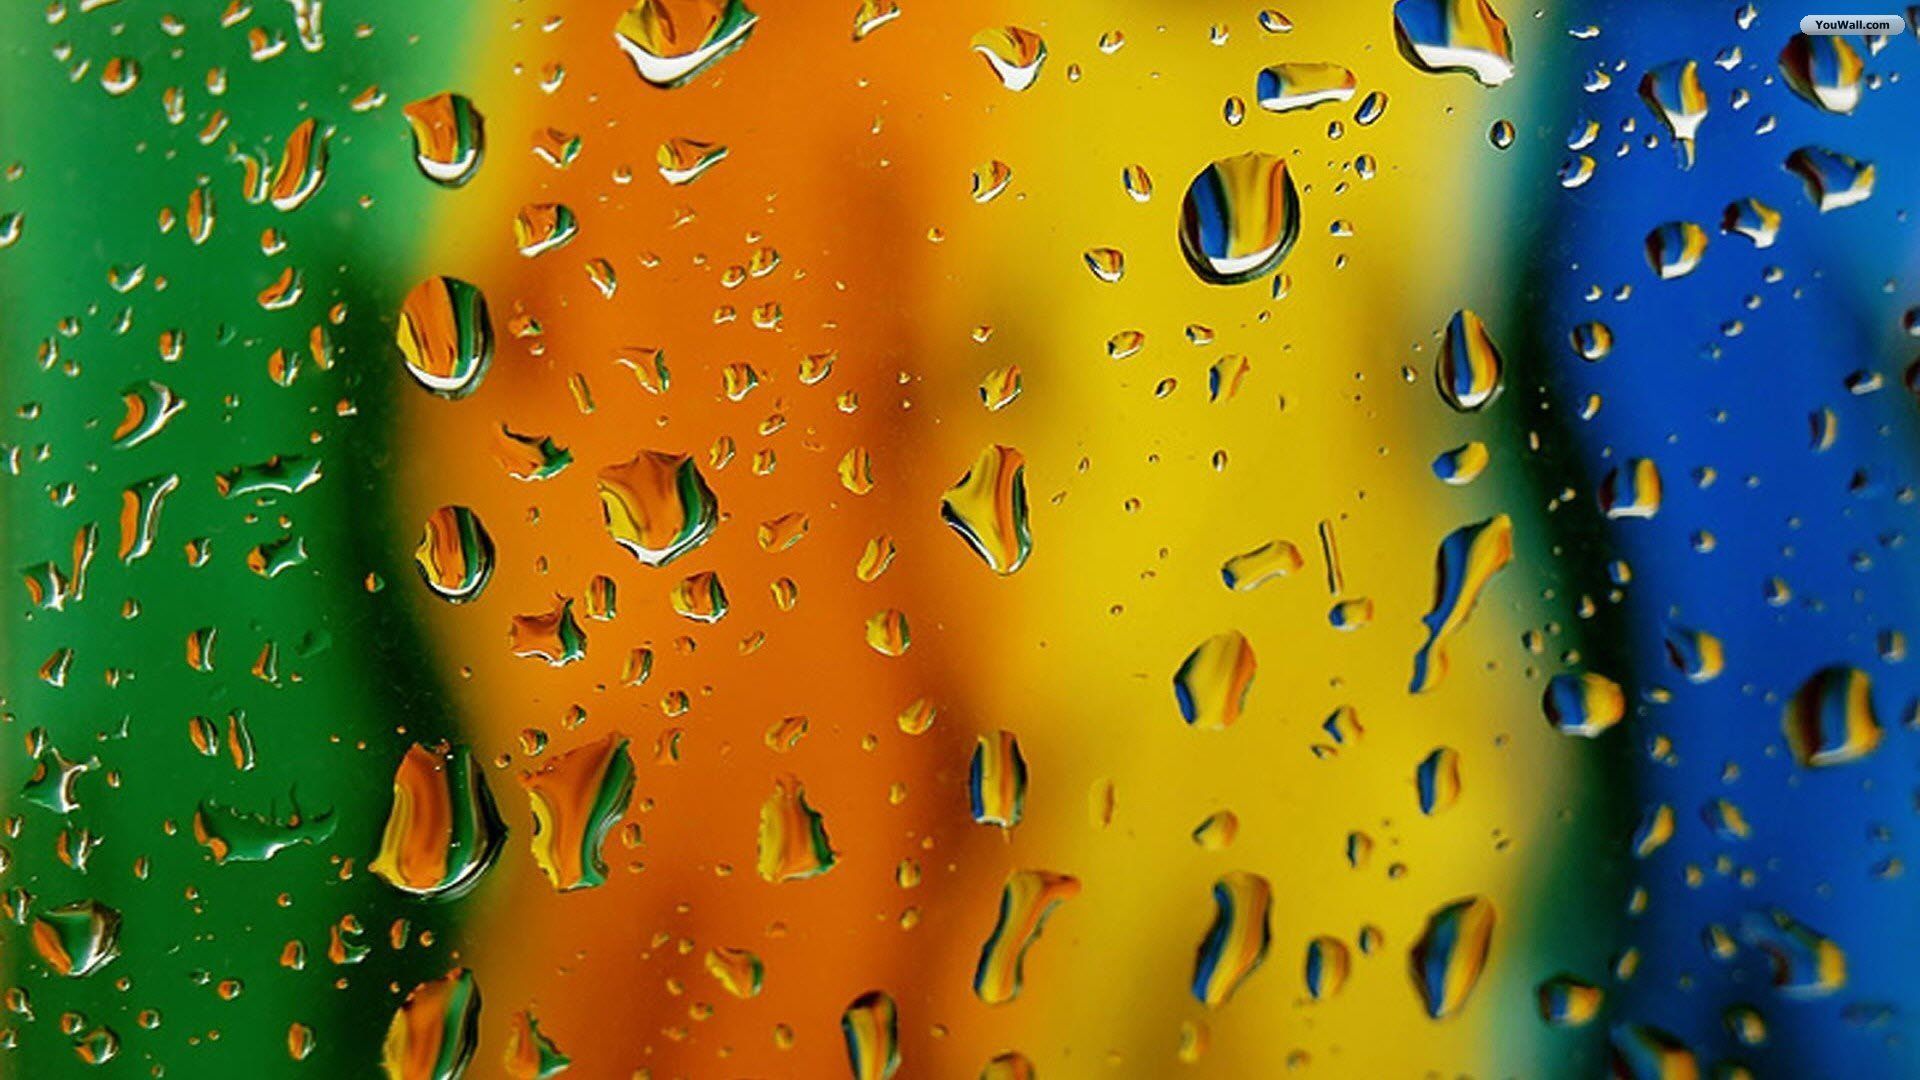 YouWall - Wet Colored Glass Wallpaper - wallpaper,wallpapers,free ...